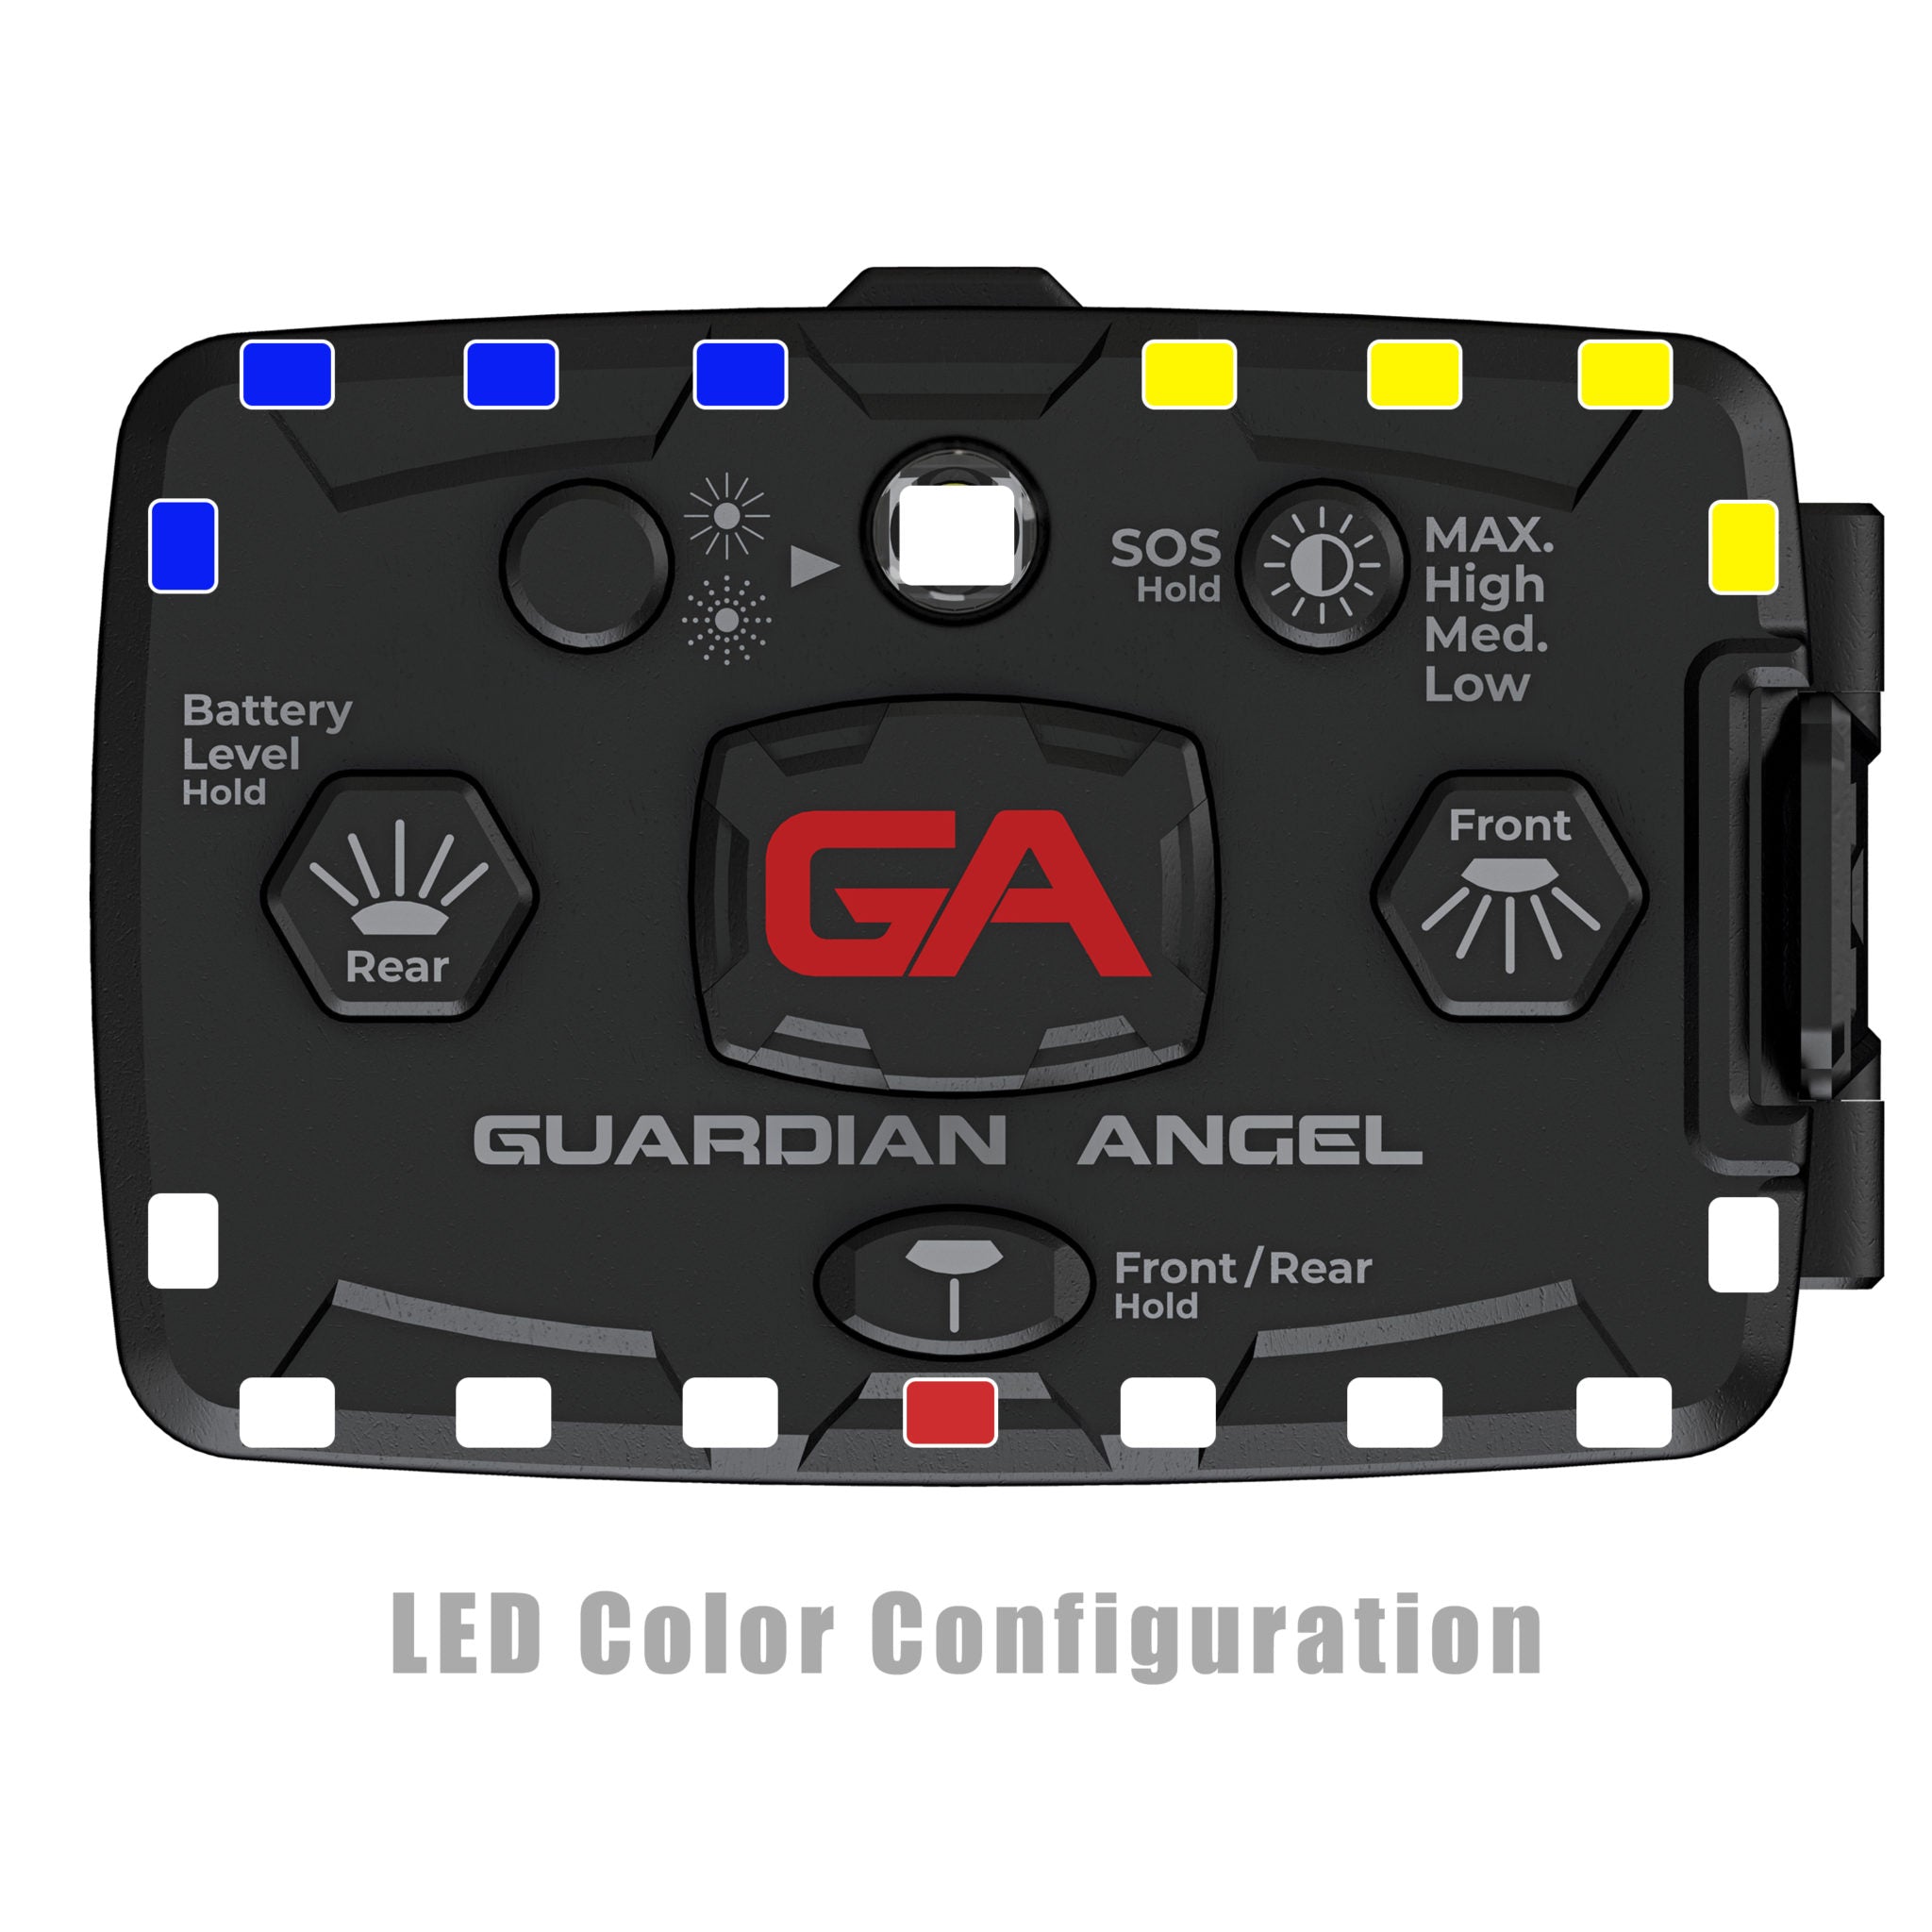 Guardian Angel Elite White/Blue & Yellow Wearable Safety Light (ELT-W/BY)